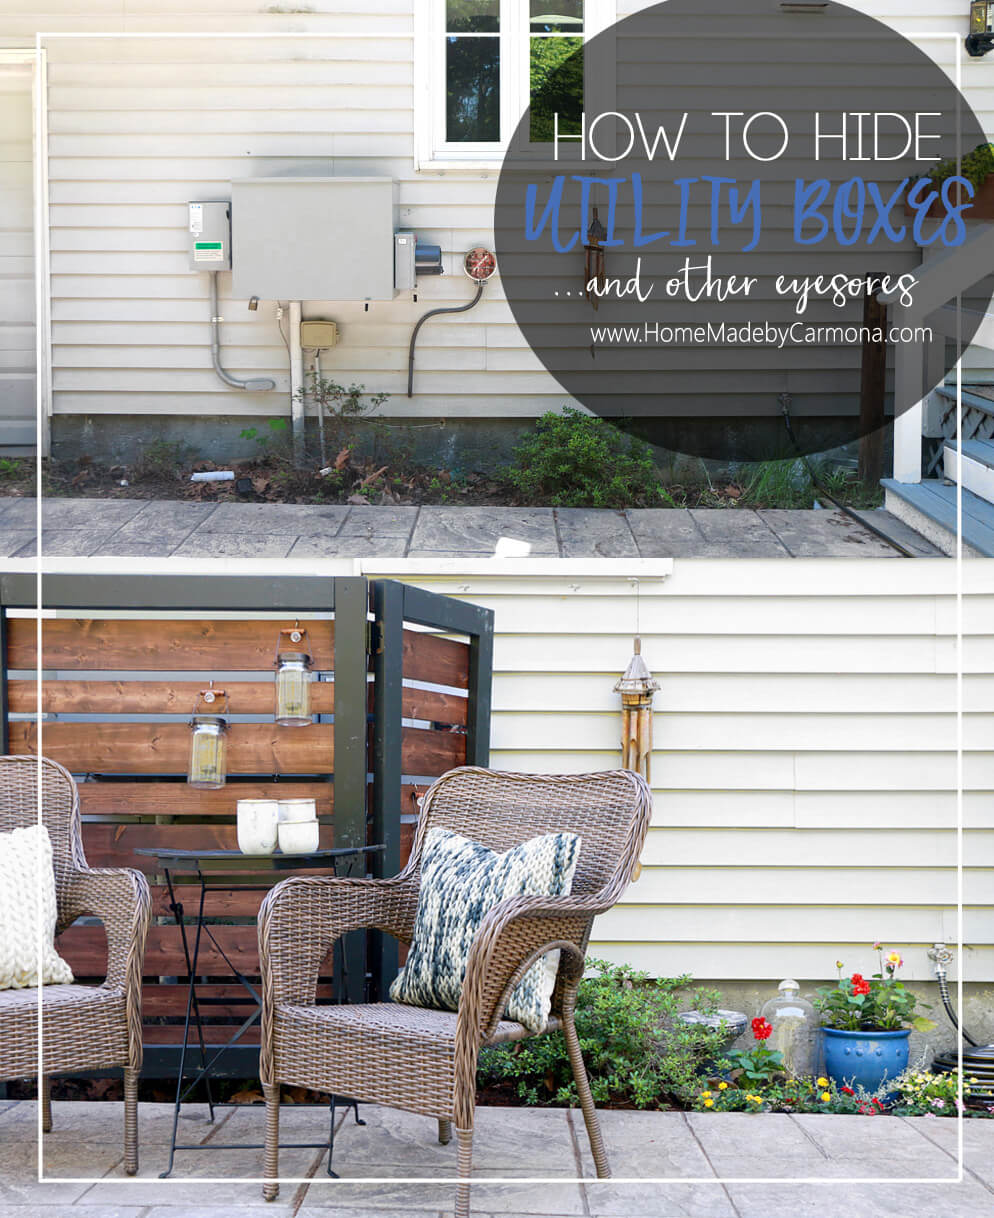 How to hide utility boxes and other eyesores